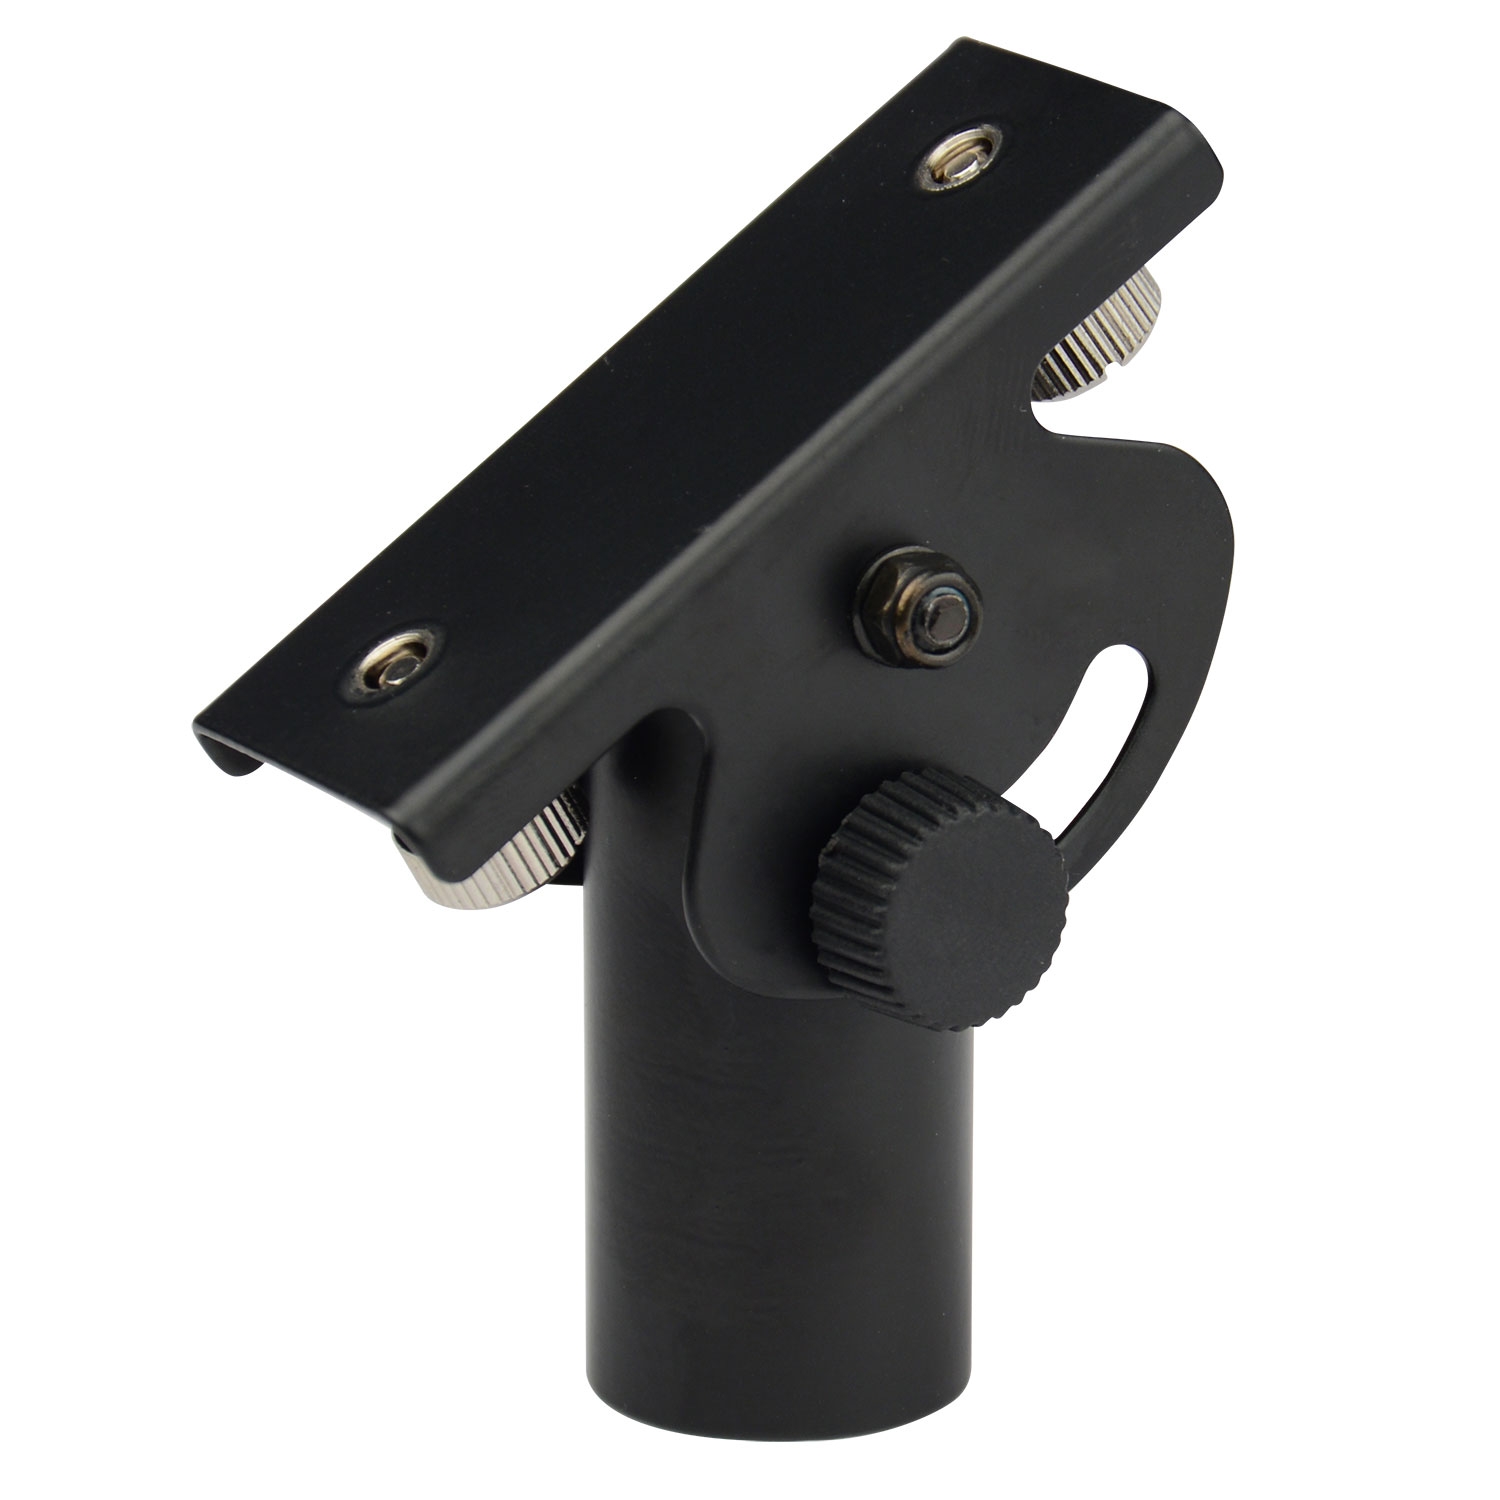 Microphone stand adapter for Mi4U, Mi6U and MIXtouch8 mixer